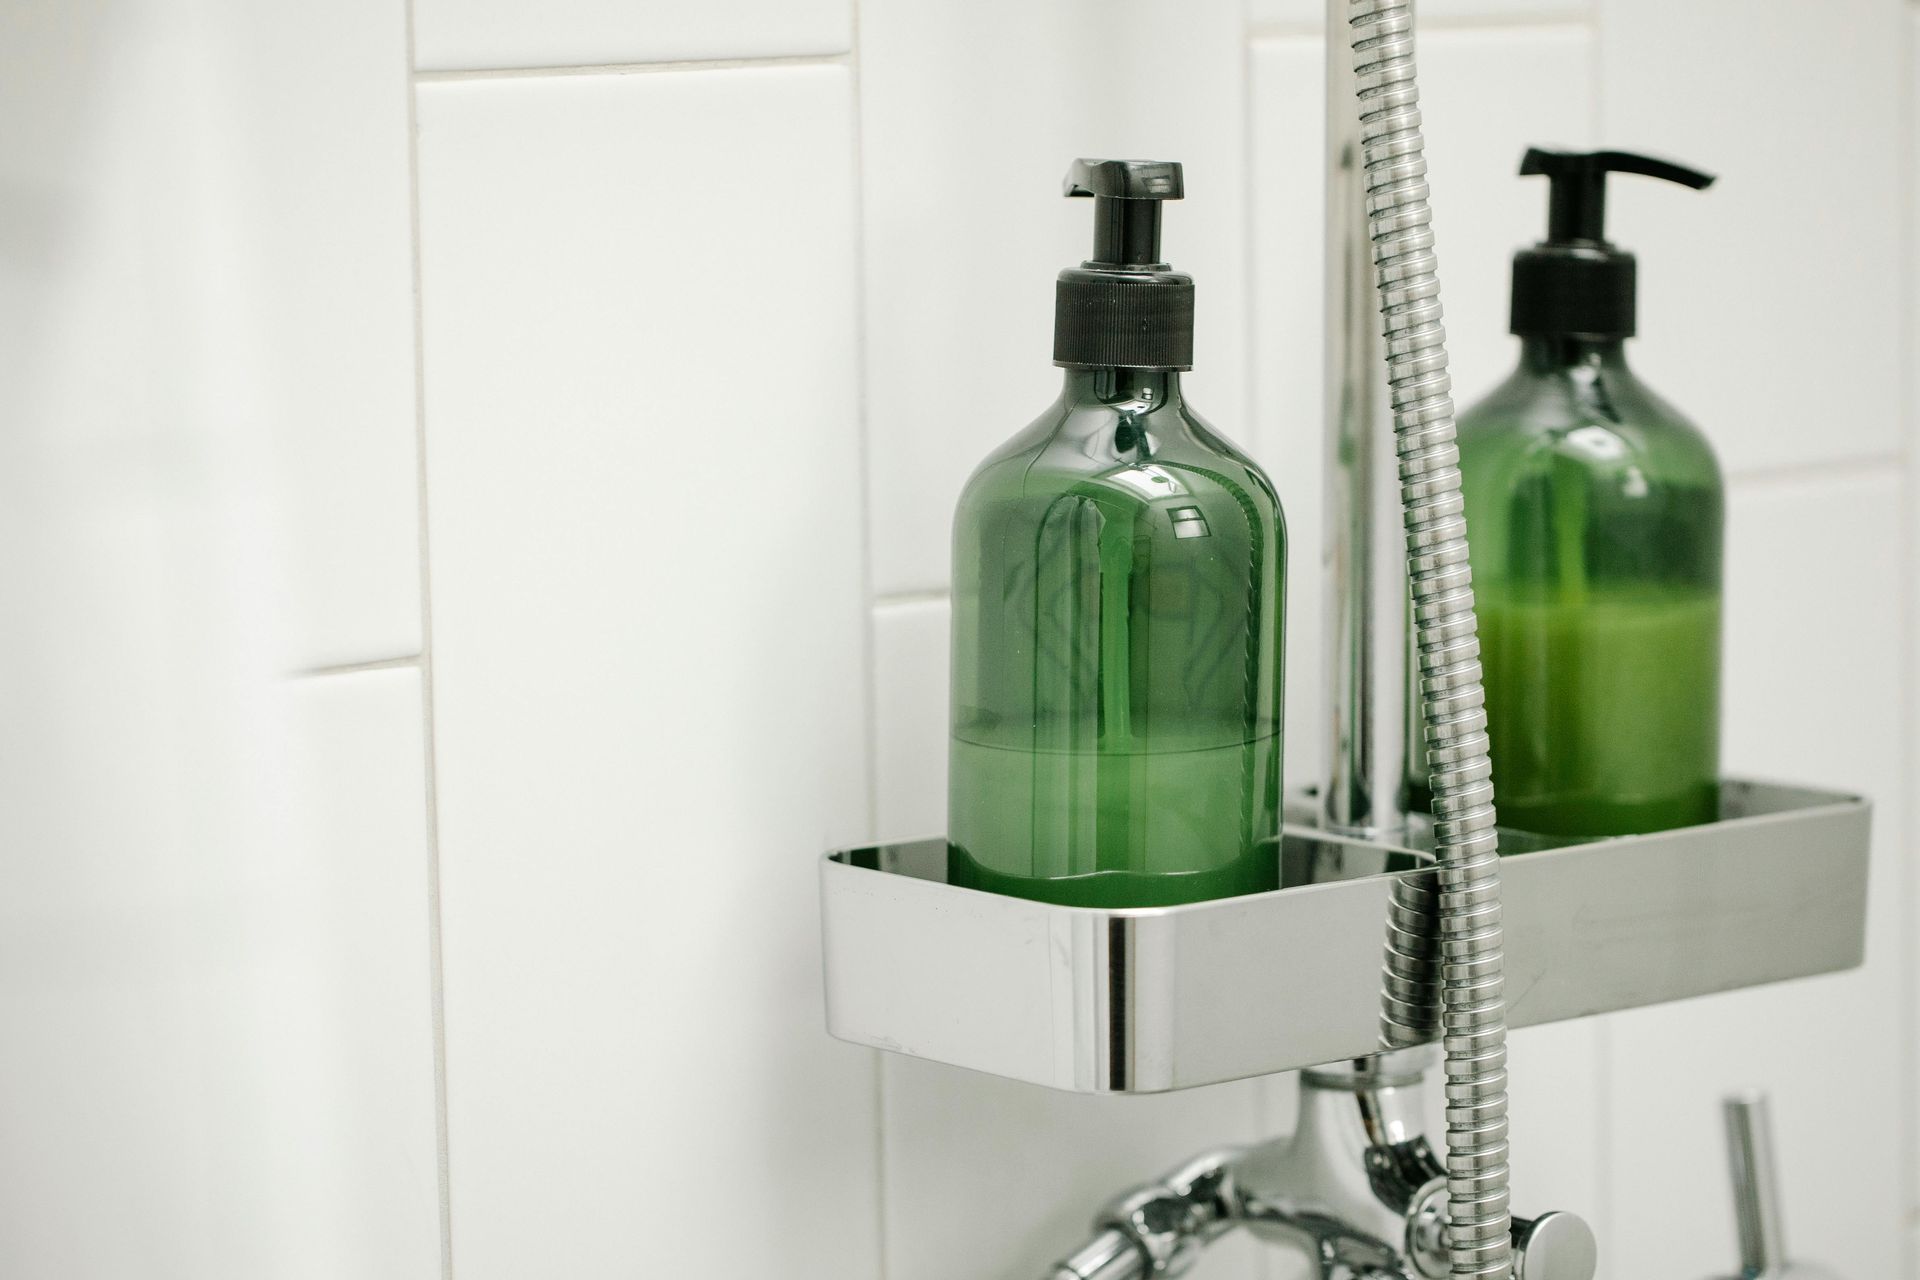 Two green bottles of soap are sitting on a shelf next to a shower head.